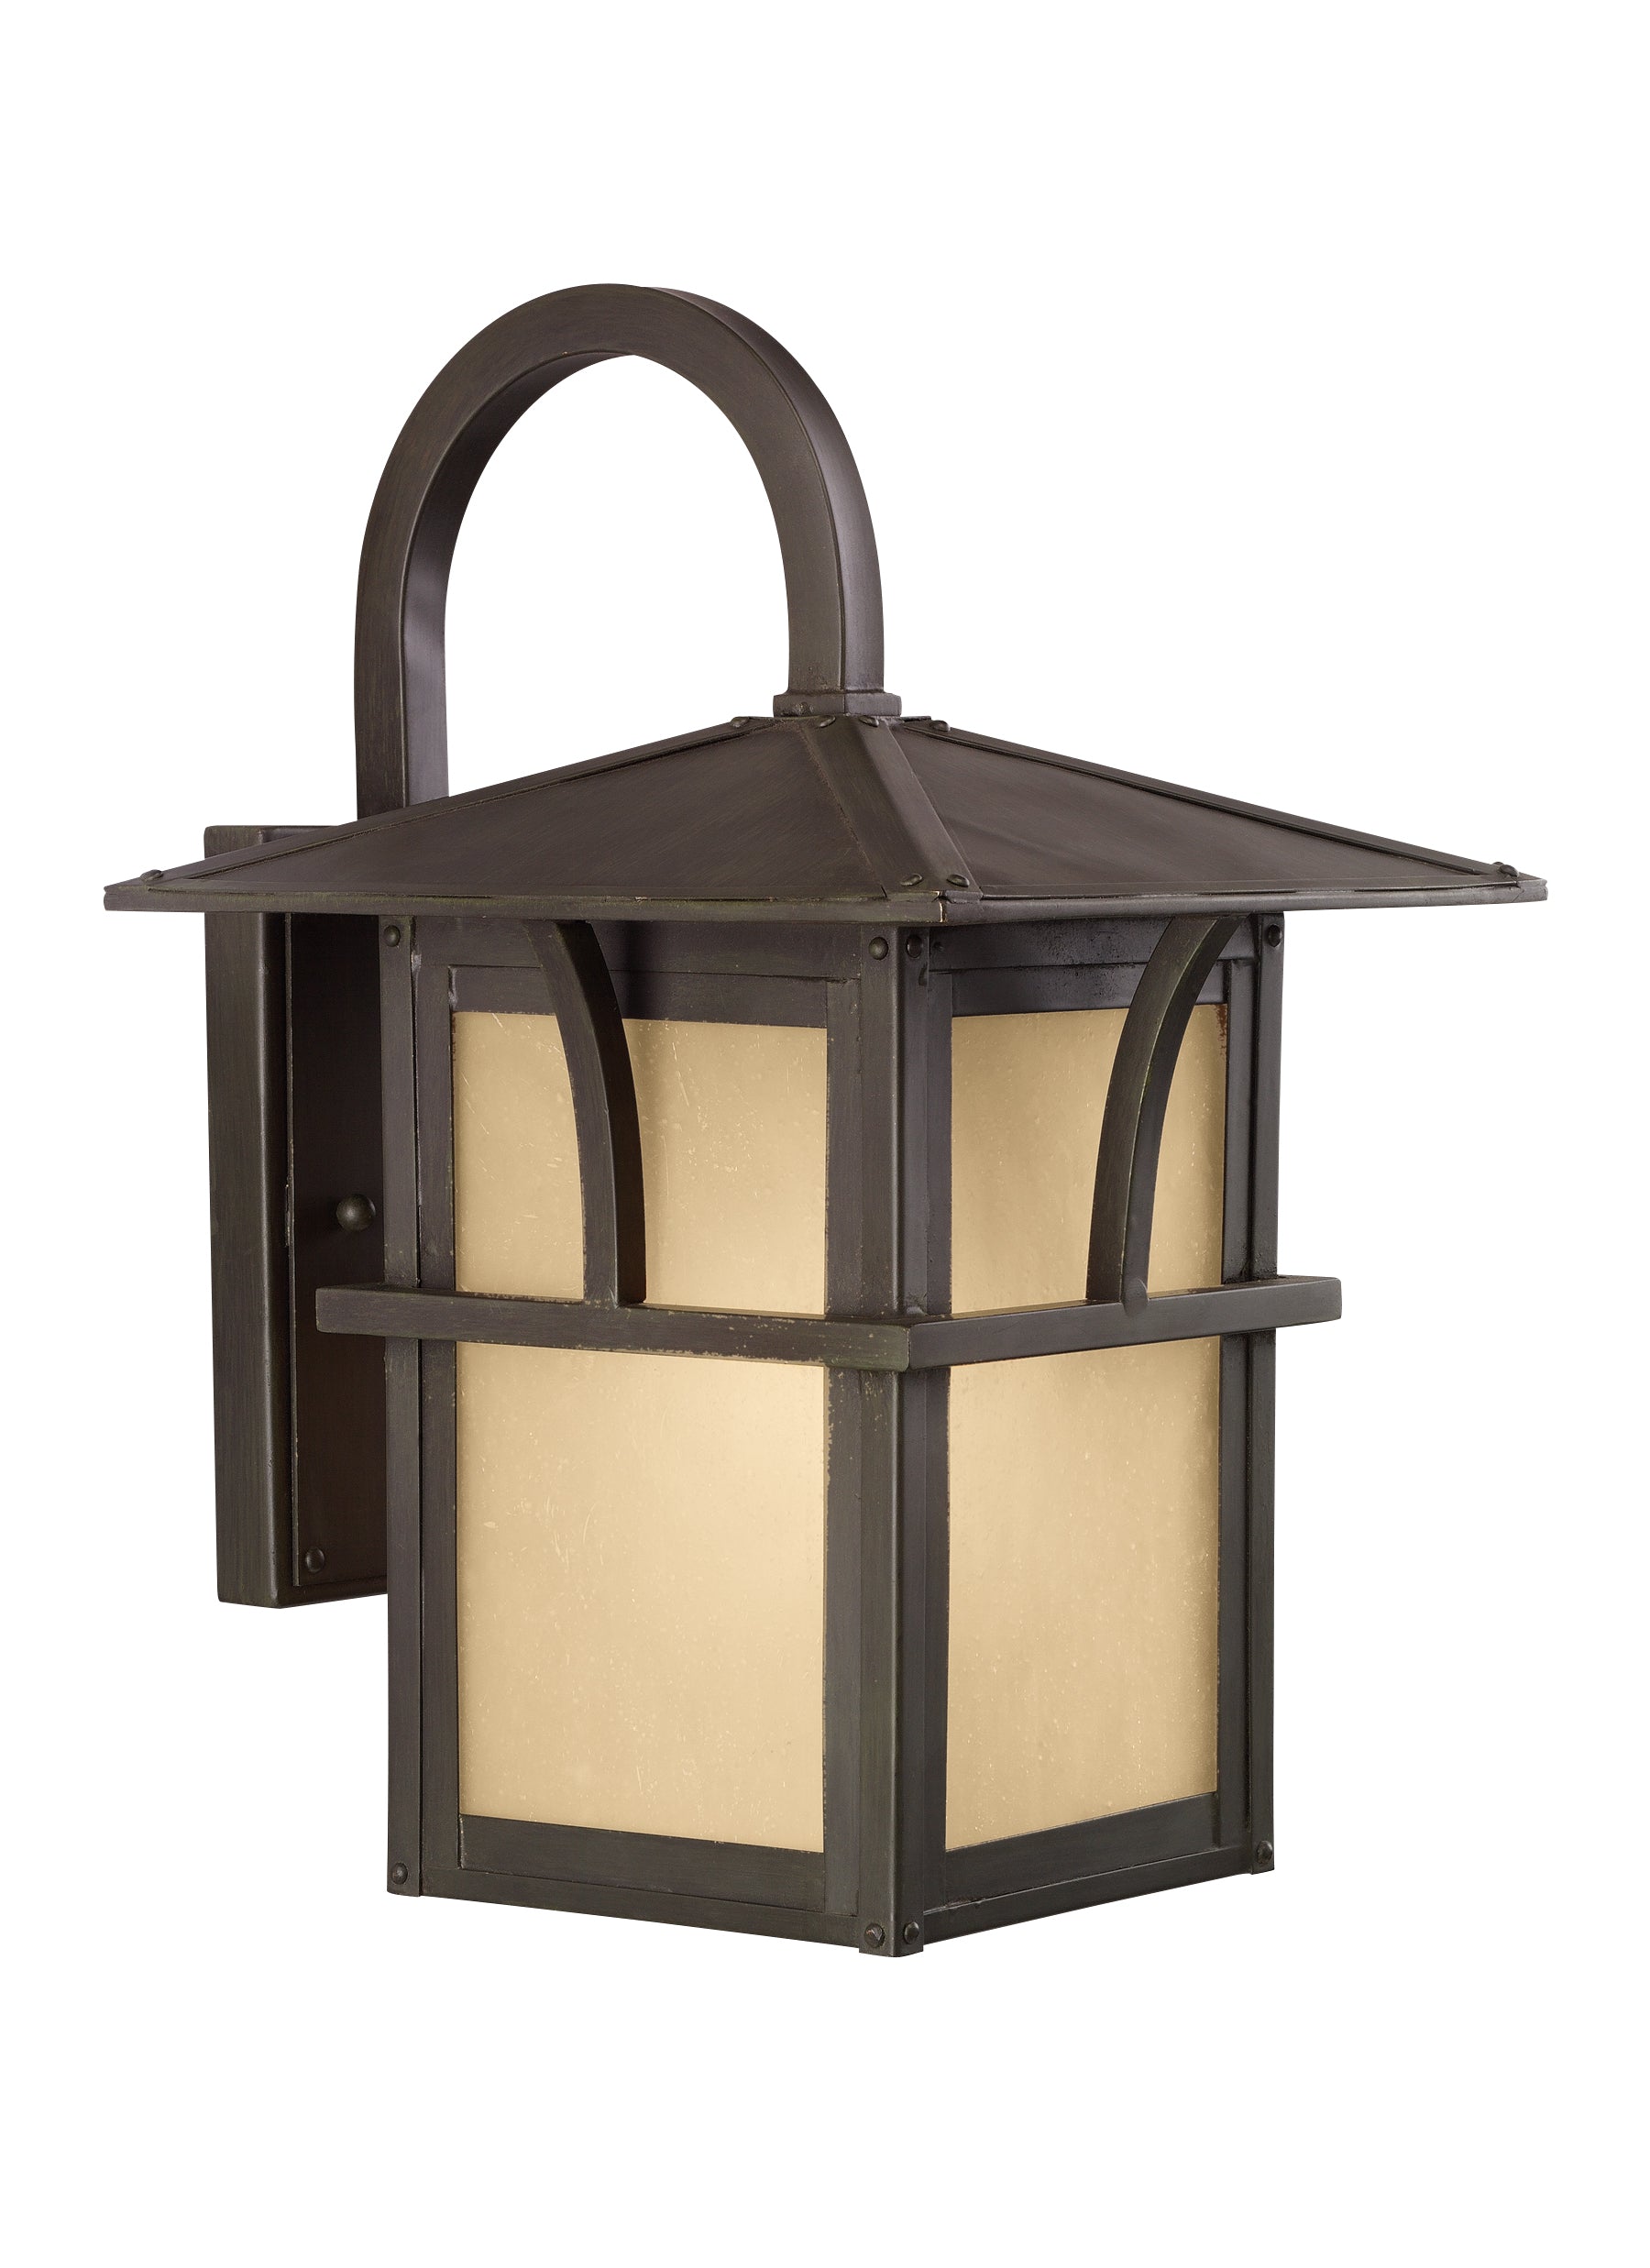 Medford Lakes transitional 1-light outdoor exterior medium wall lantern sconce in statuary bronze finish with etched hamme...